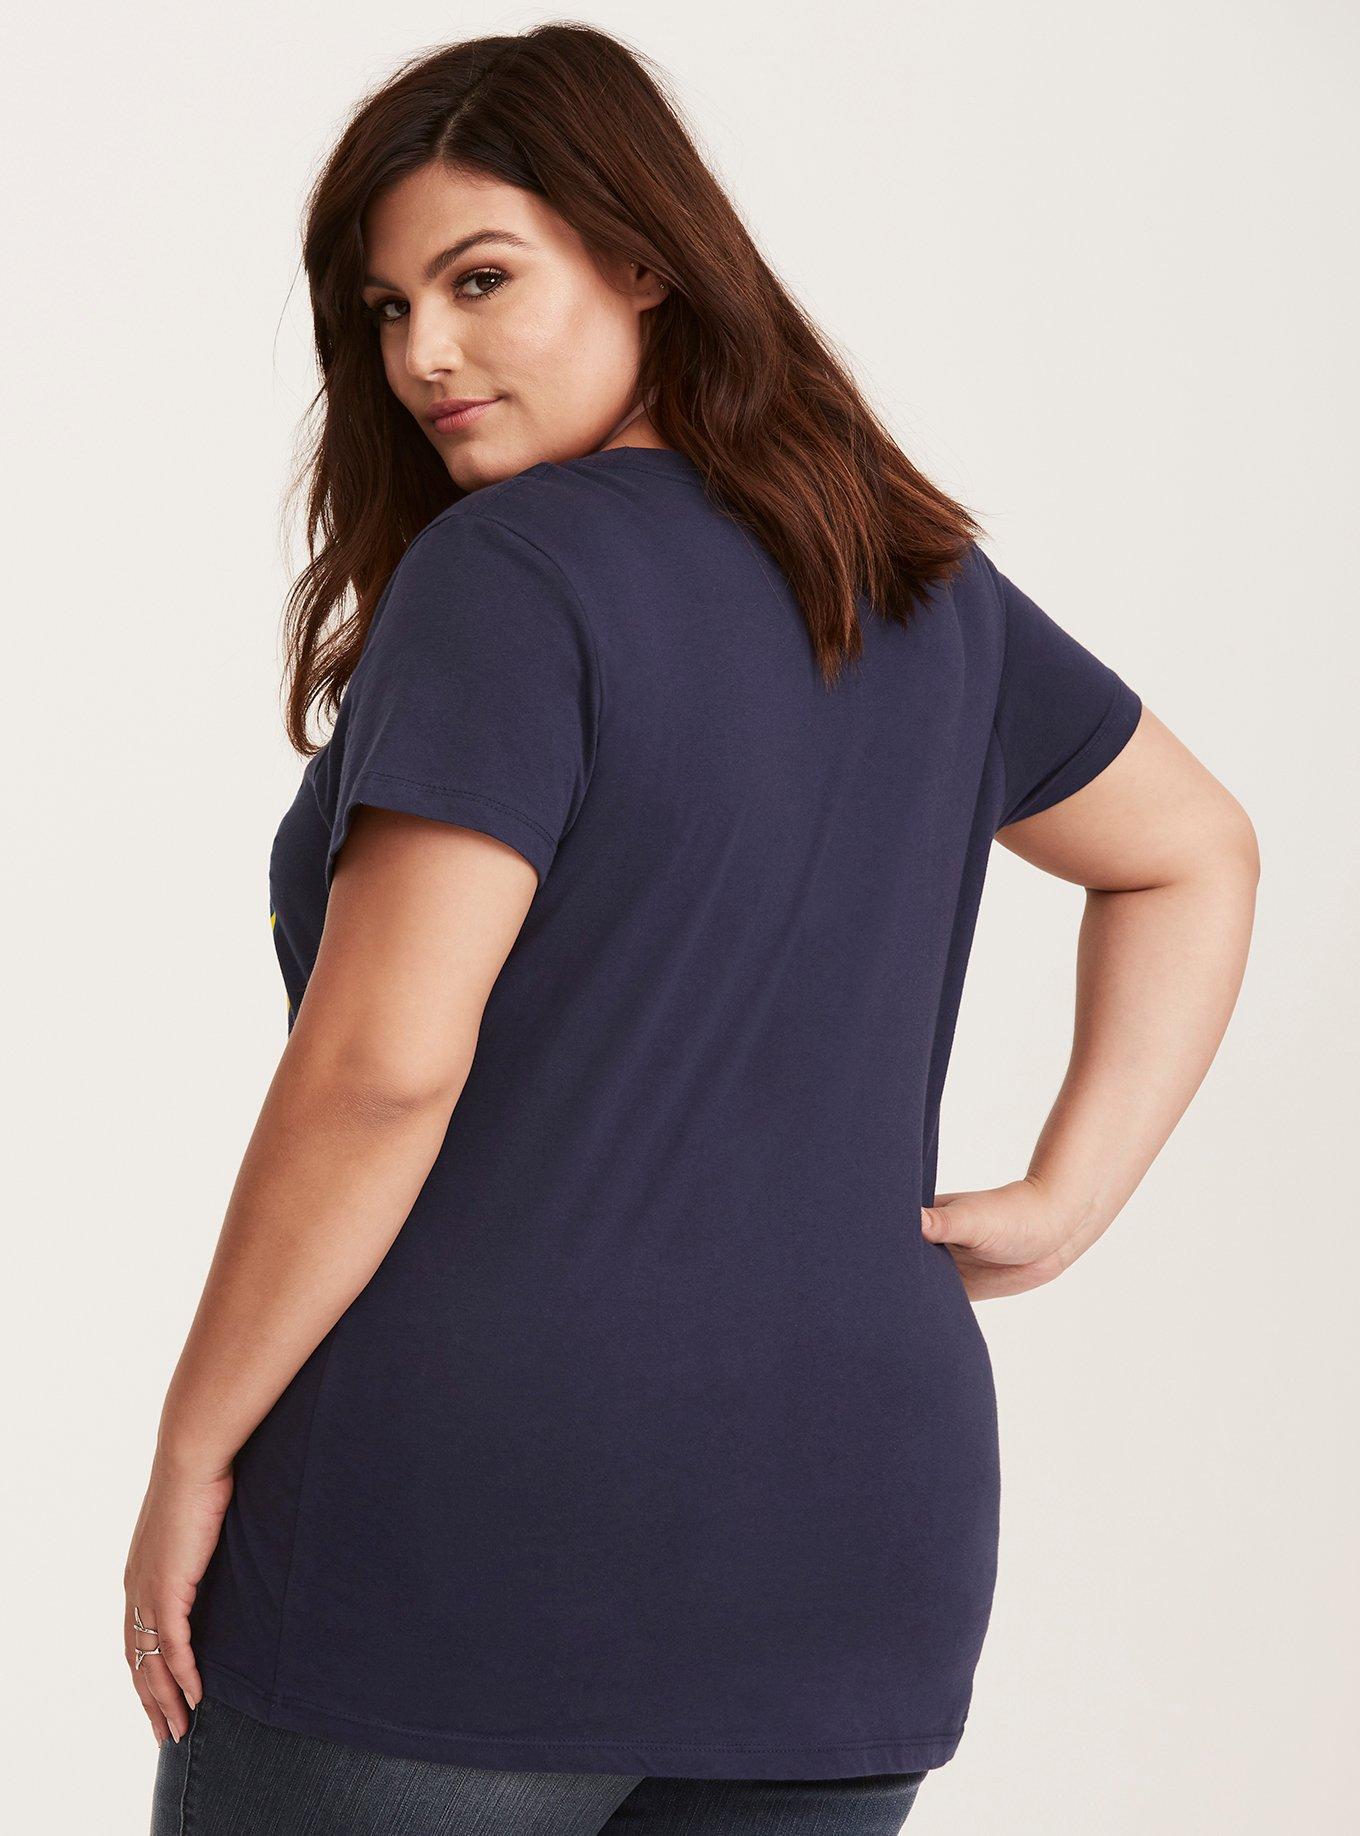 Styled by ReahTest Drive- Torrid Plus Size Activewear